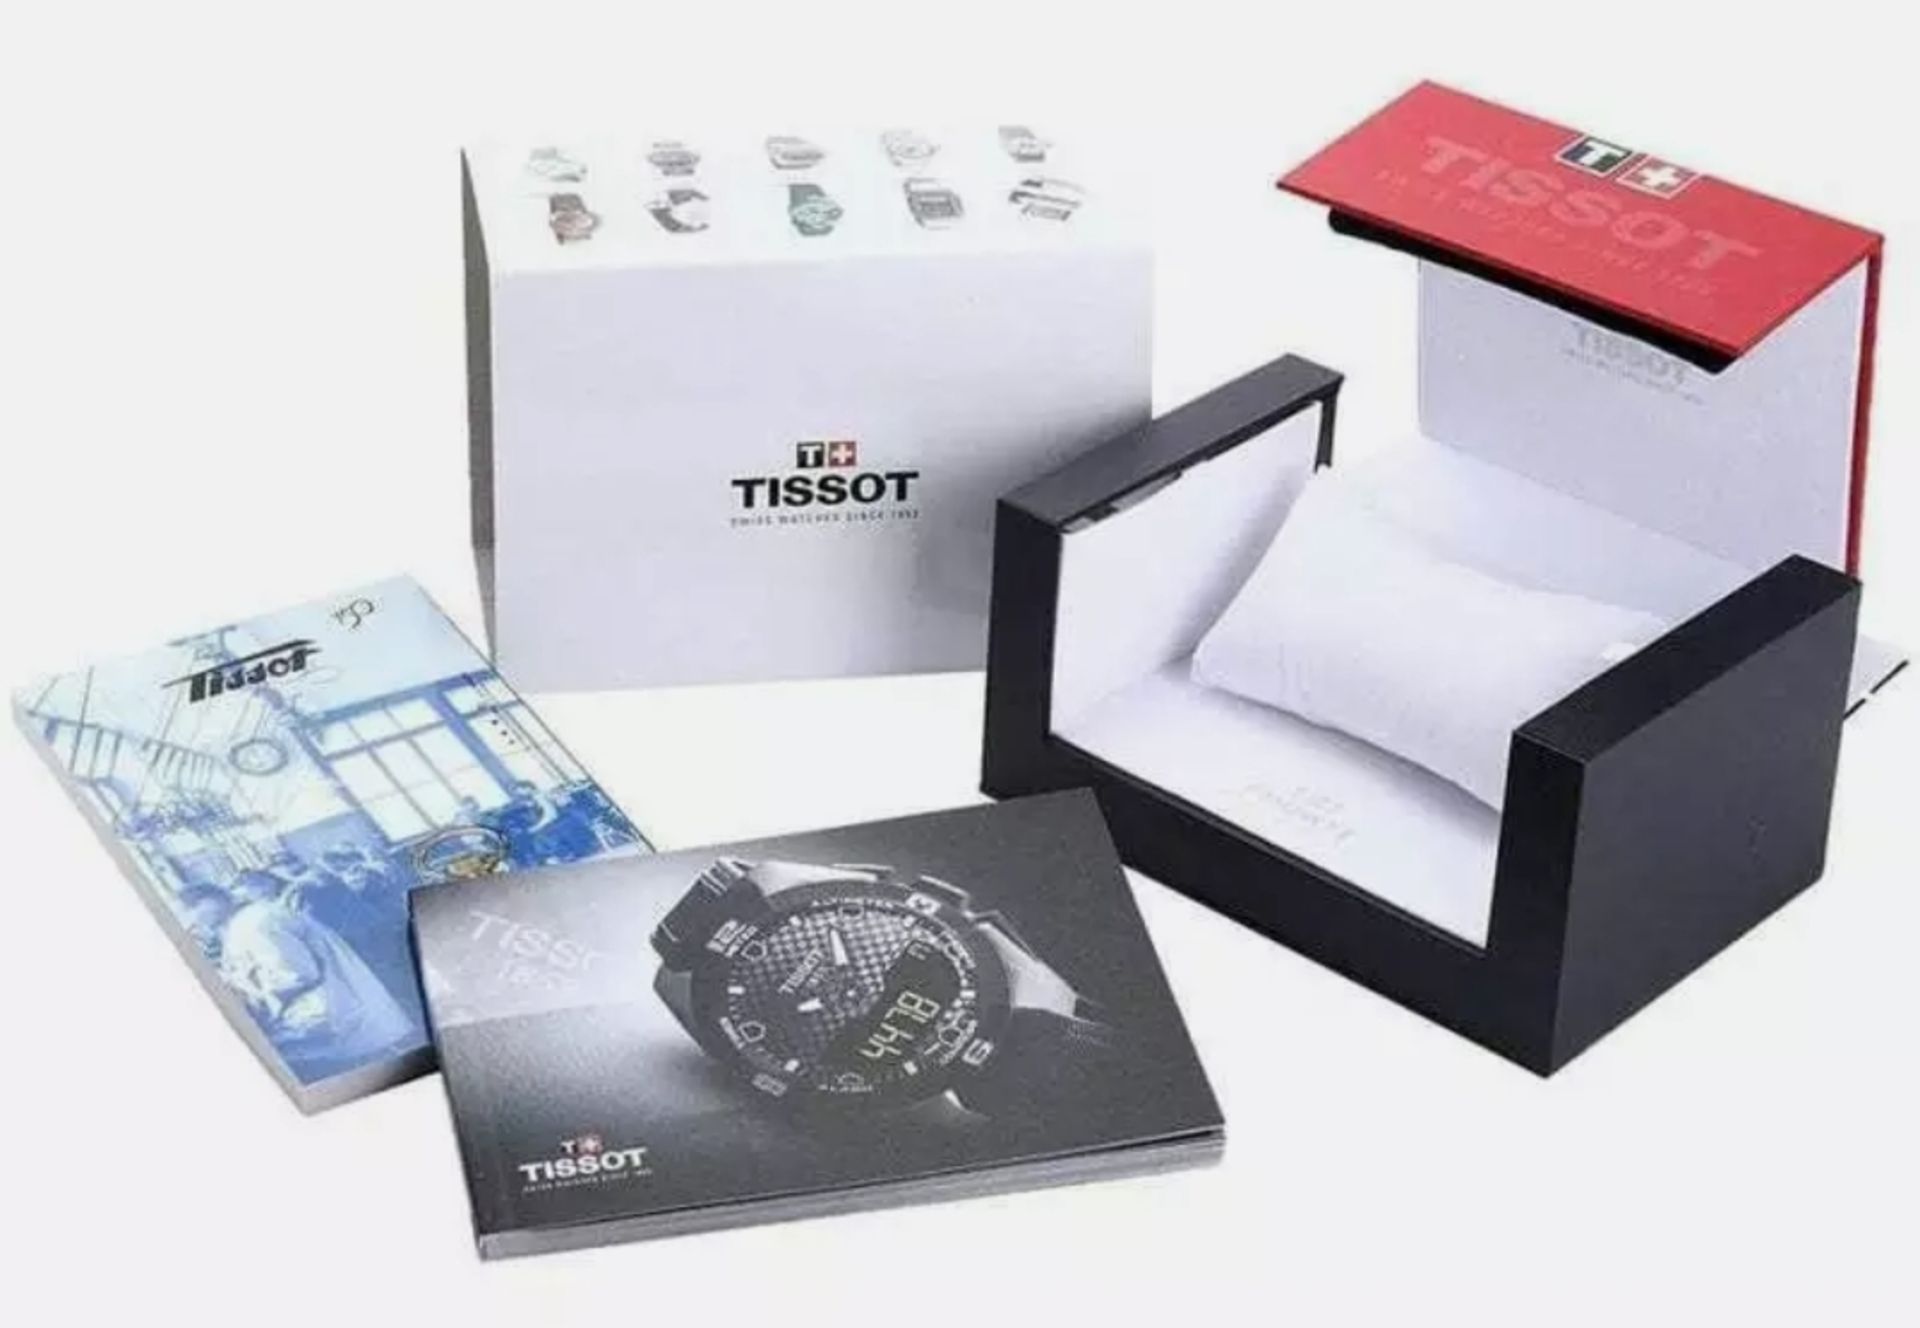 Tissot - Couturier Chronograph - T035.617.16.031.00 - Men's Watch - Image 8 of 8